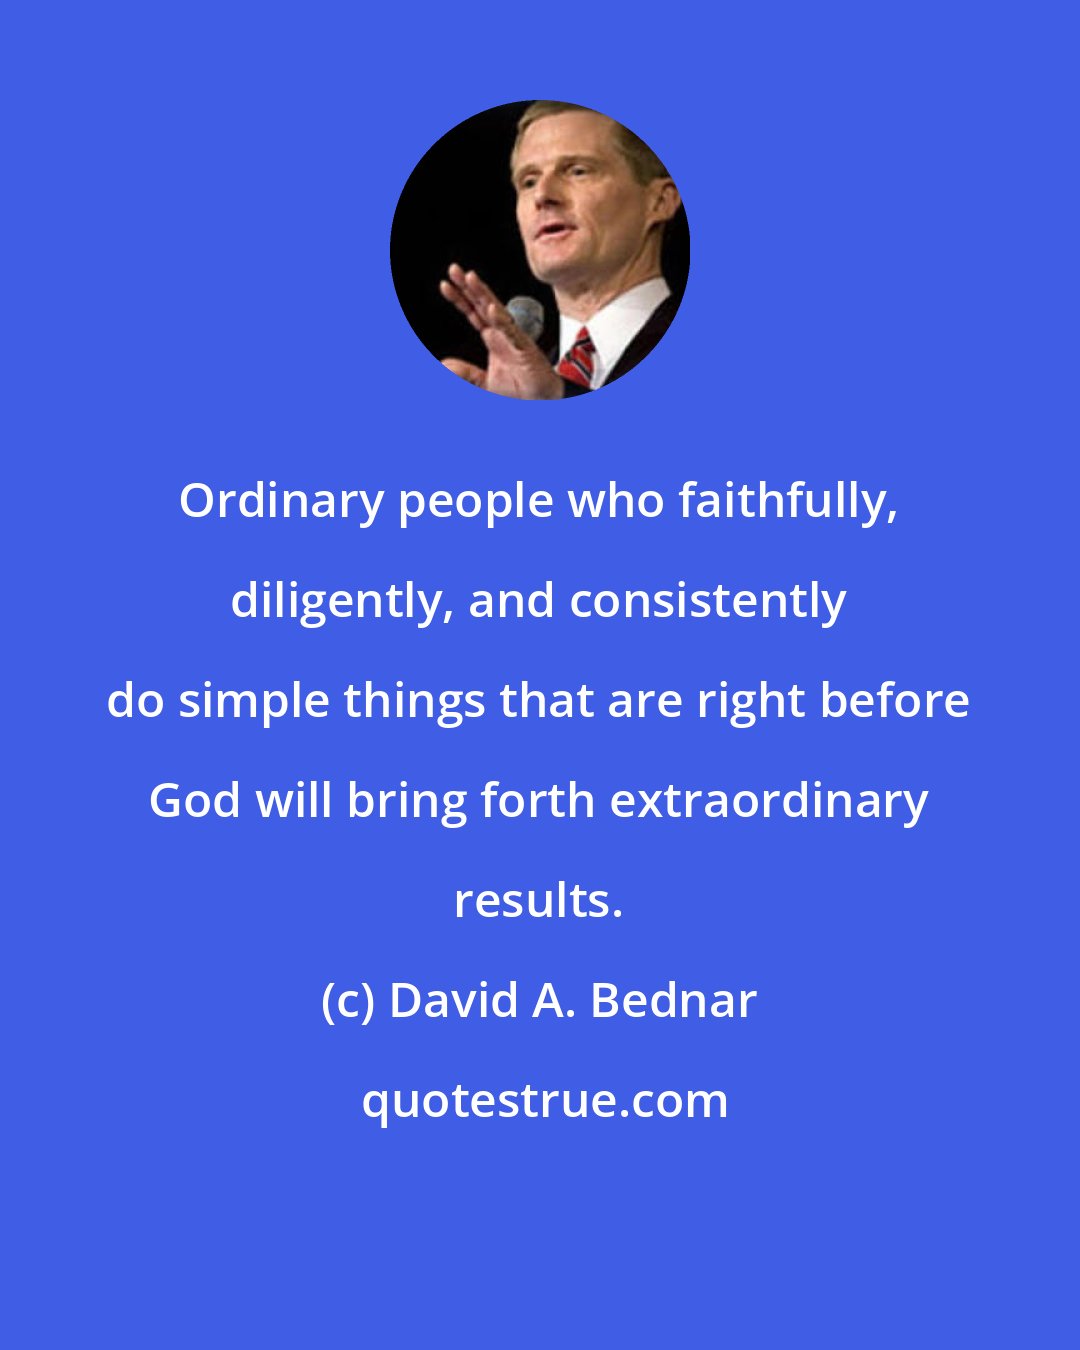 David A. Bednar: Ordinary people who faithfully, diligently, and consistently do simple things that are right before God will bring forth extraordinary results.